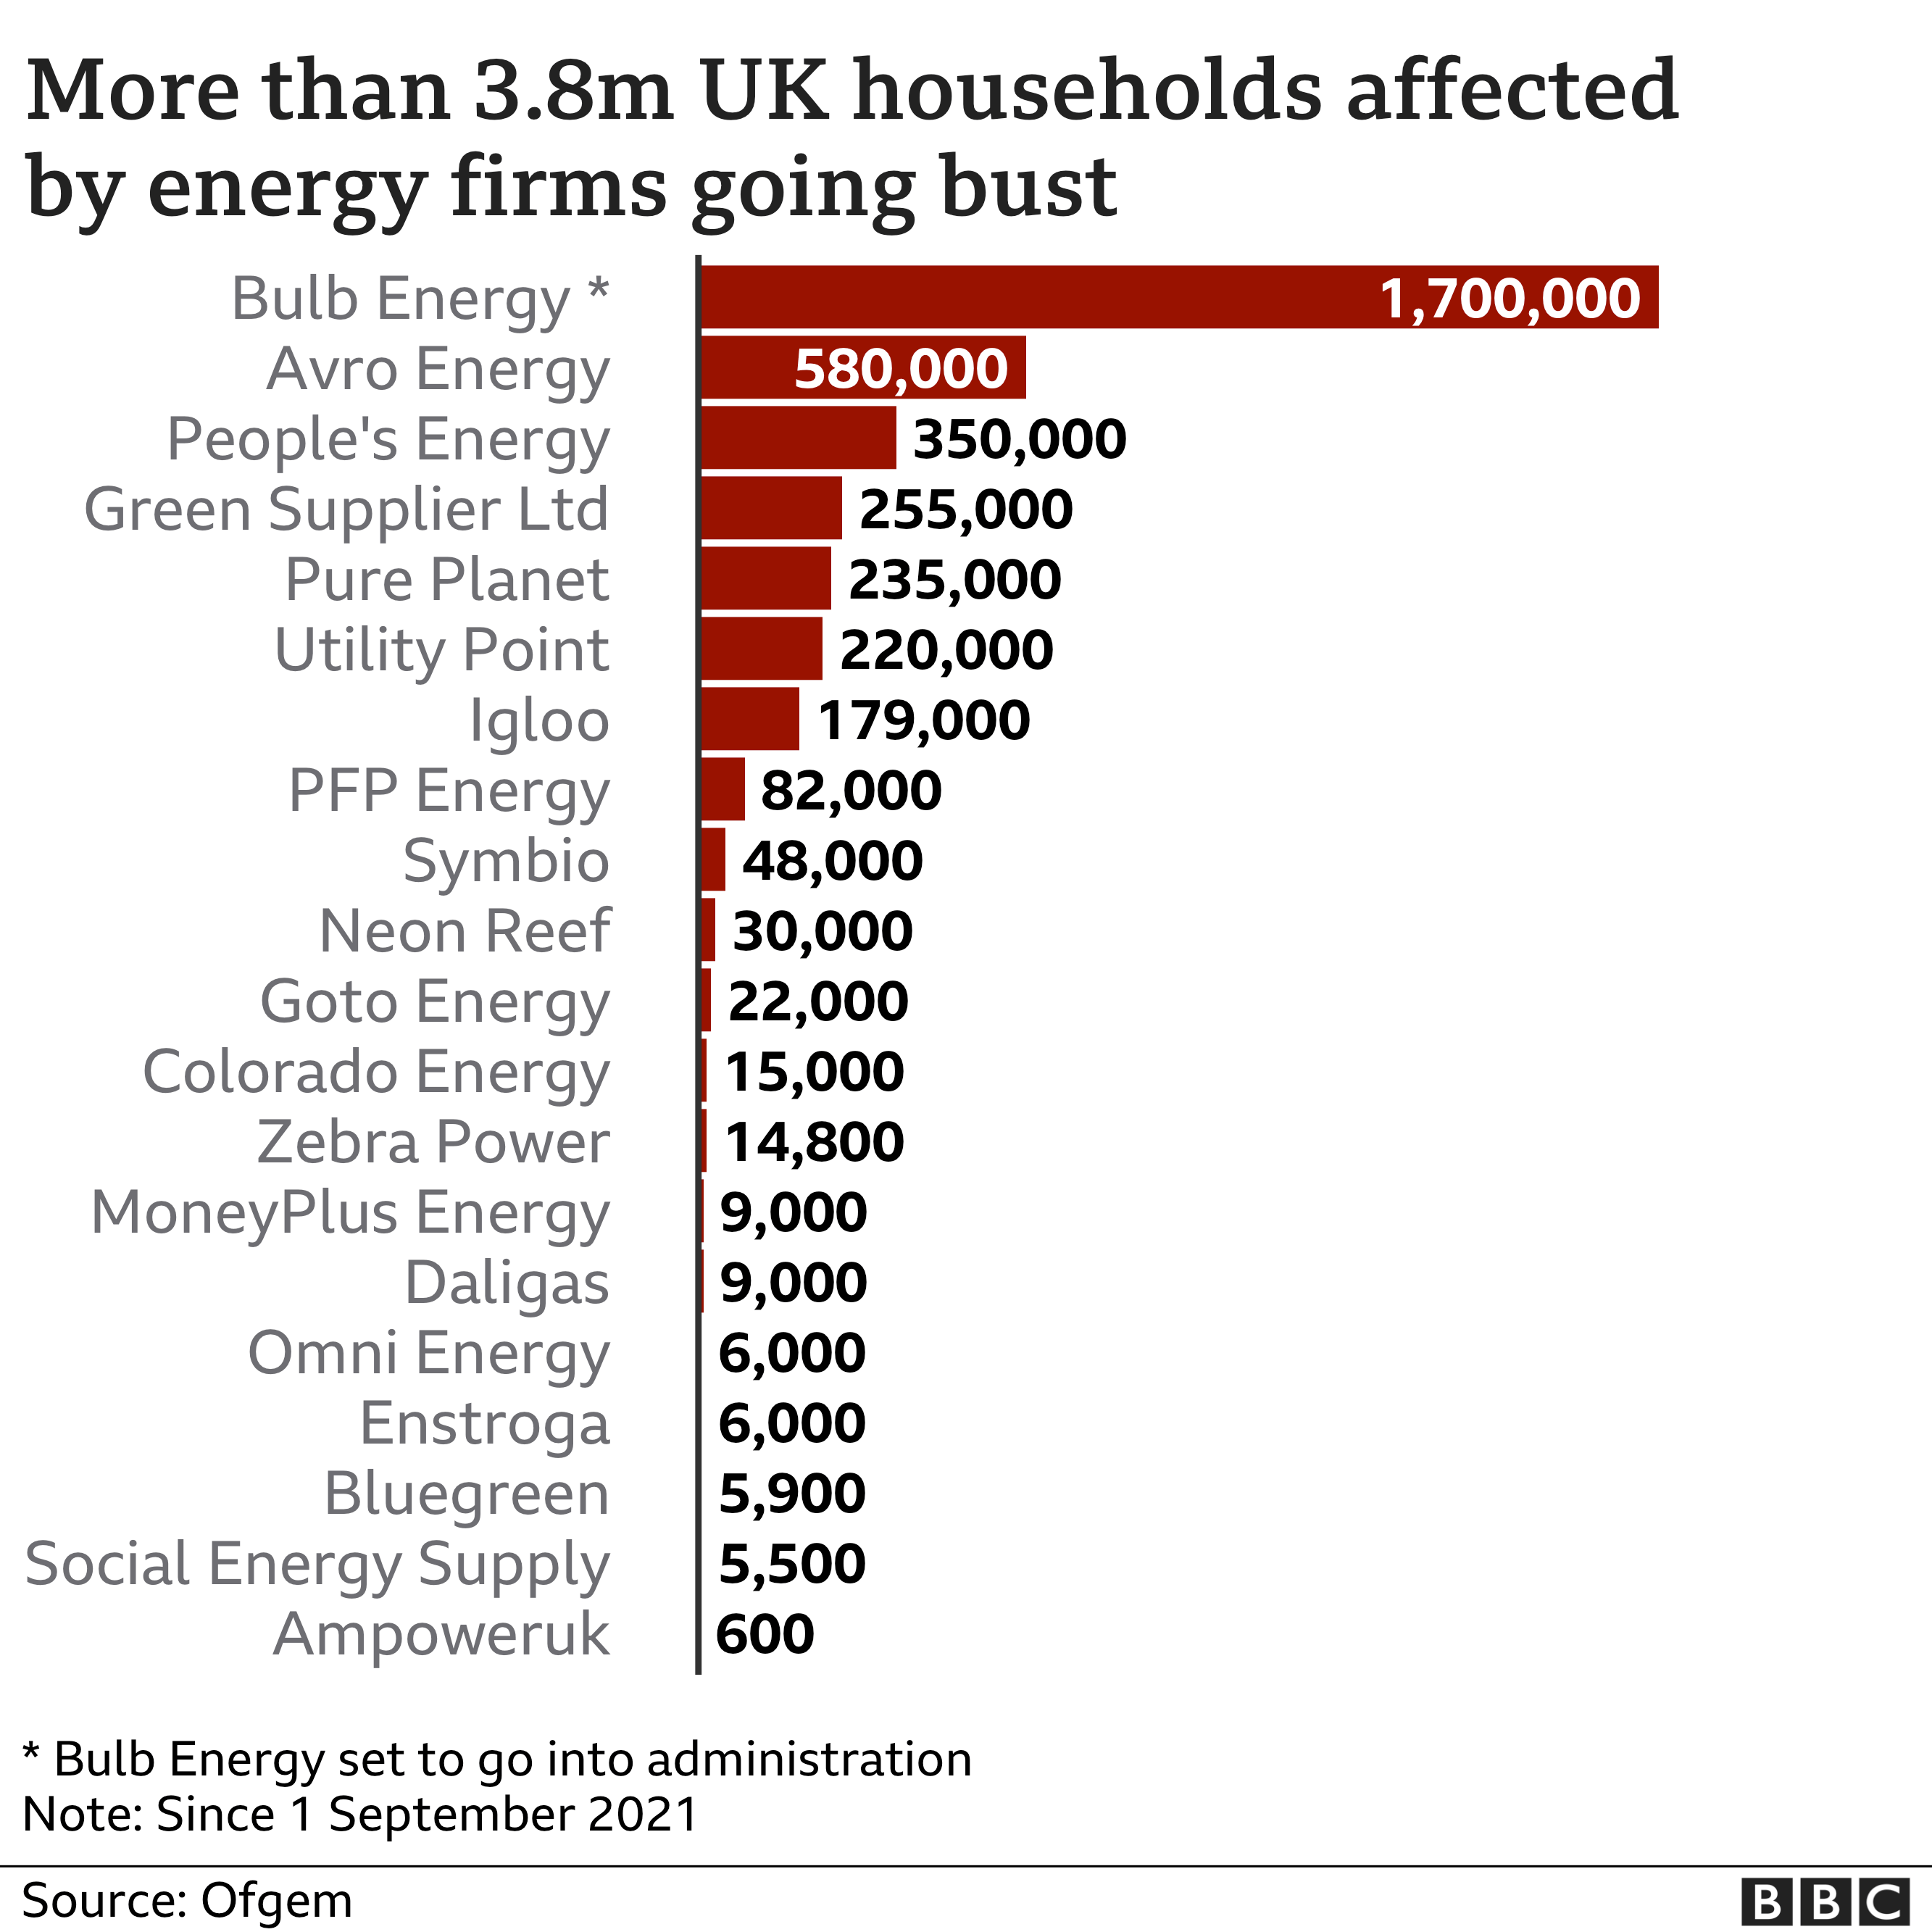 Energy firms gone bust graphic